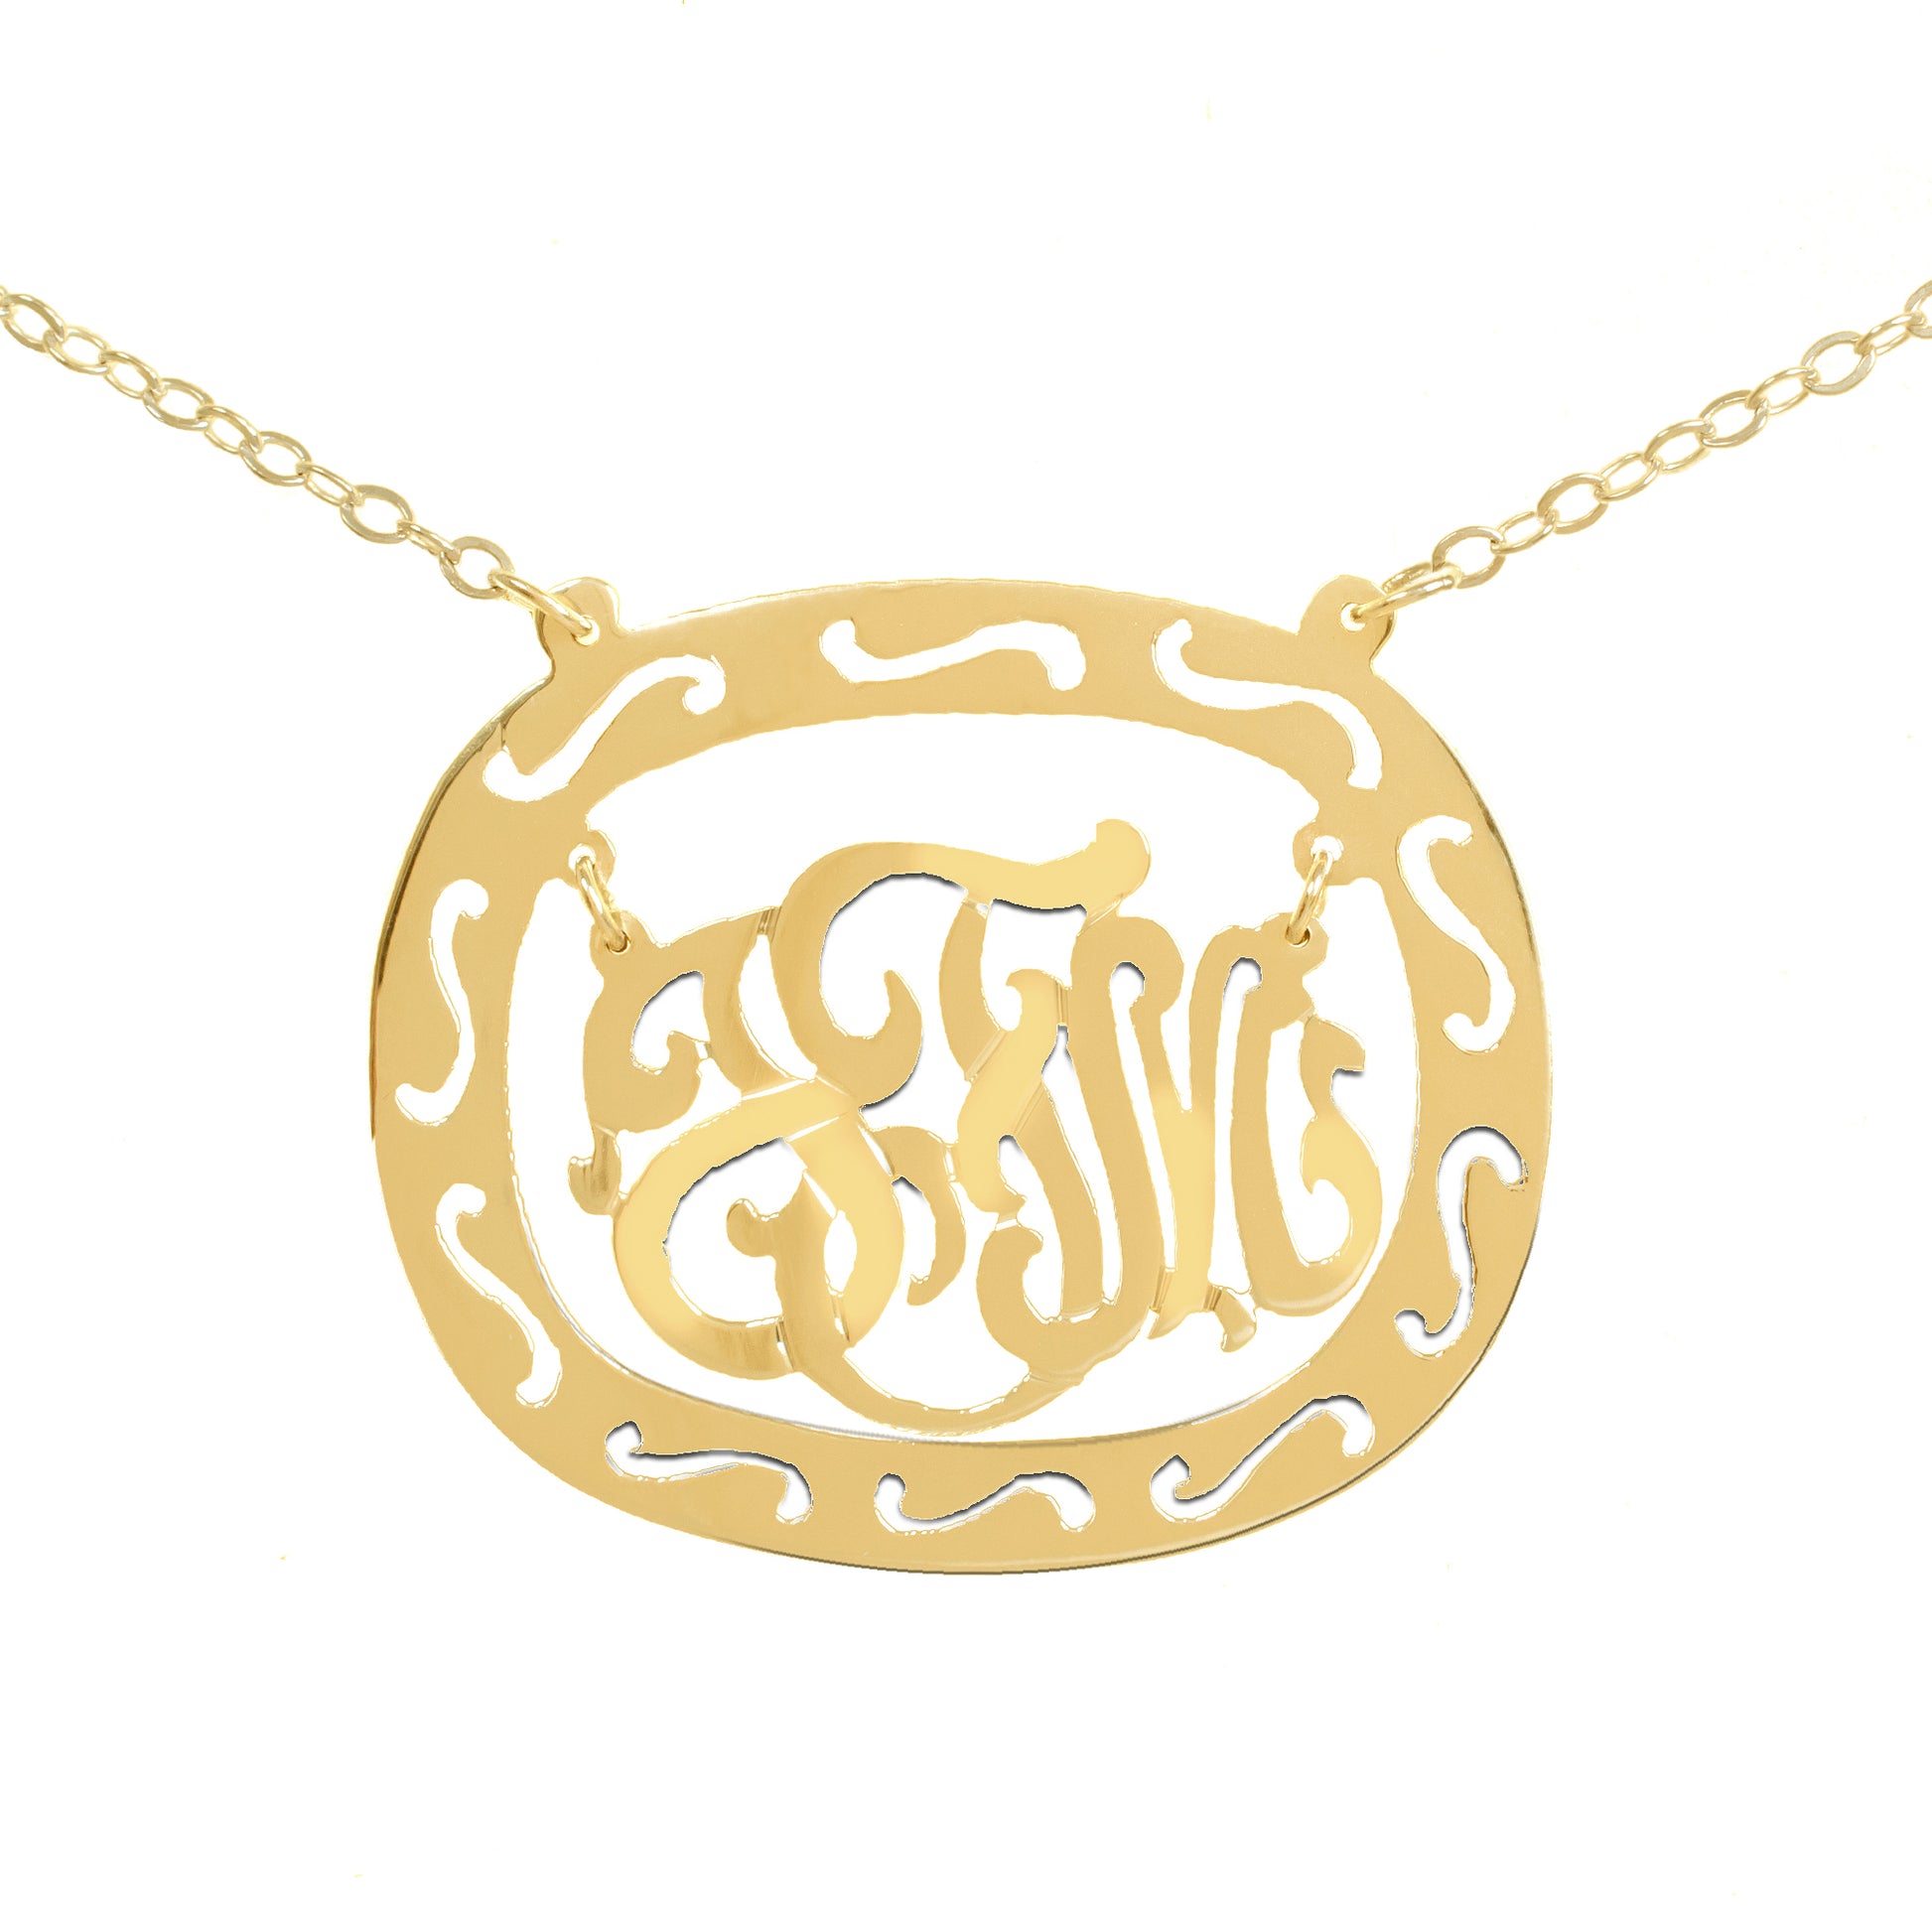 gold-plated silver oval monogram necklace inside thick patterned circular frame